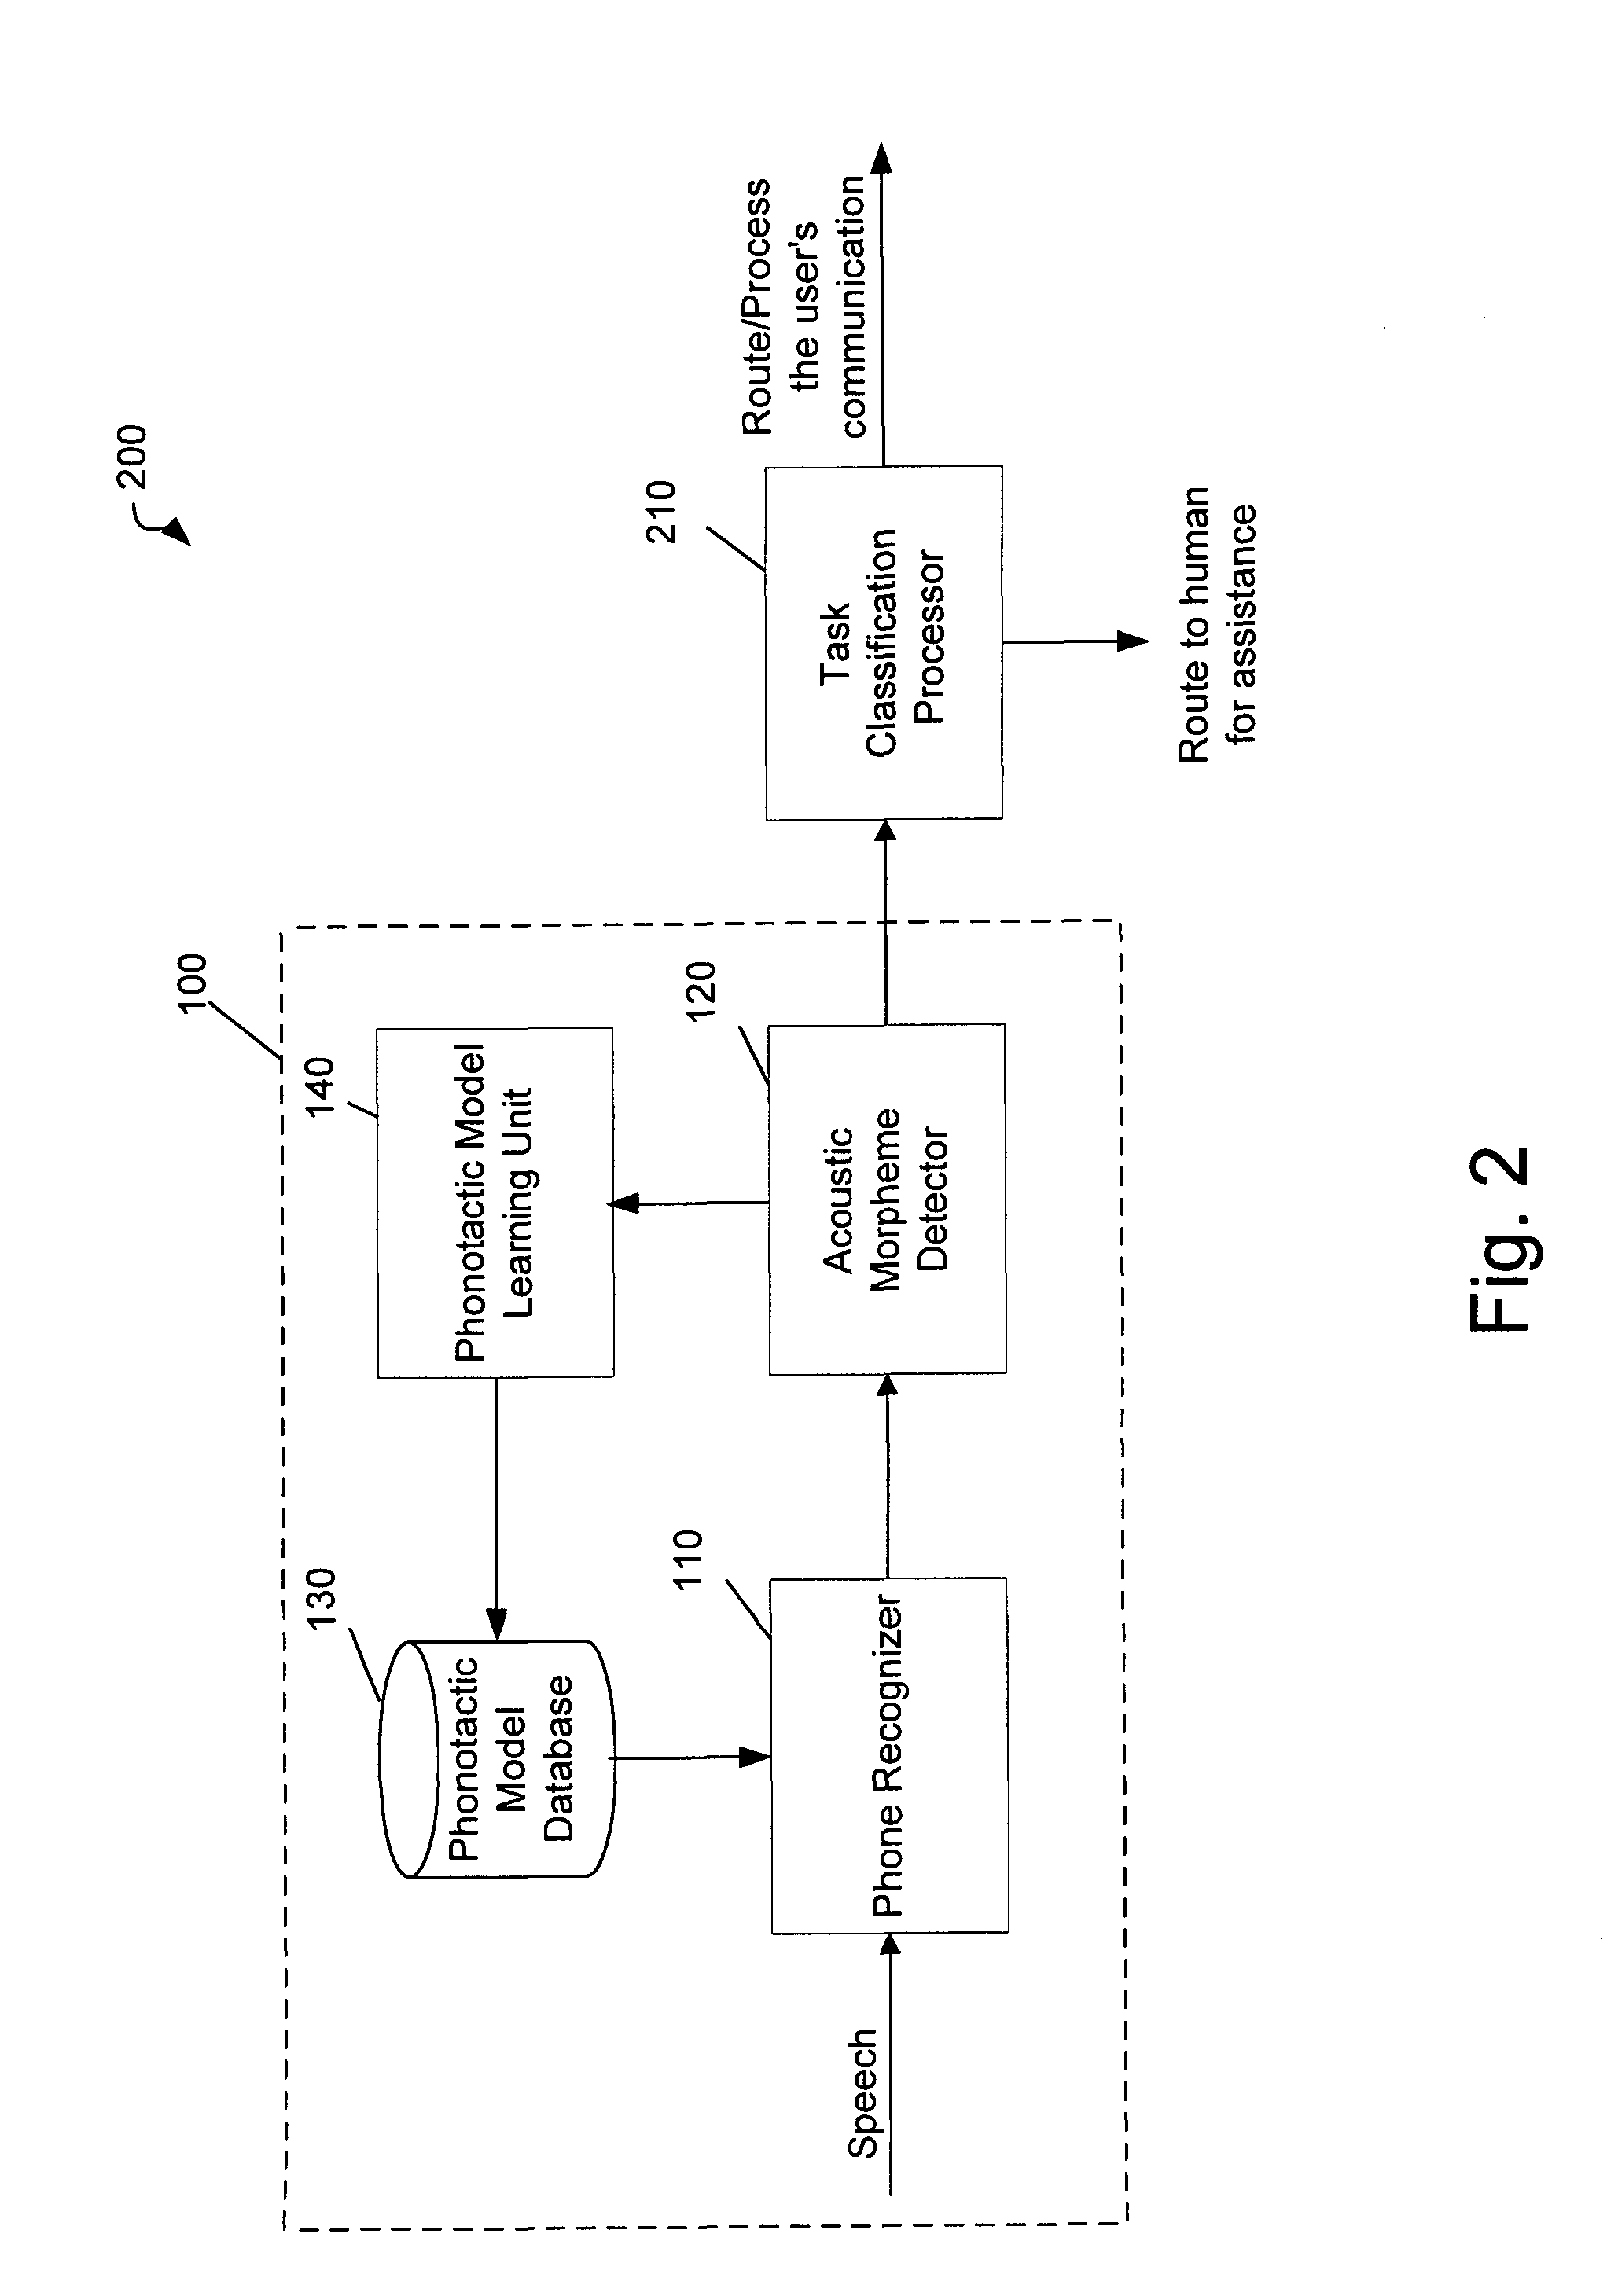 Method and System for Automatically Detecting Morphemes in a Task Classification System Using Lattices